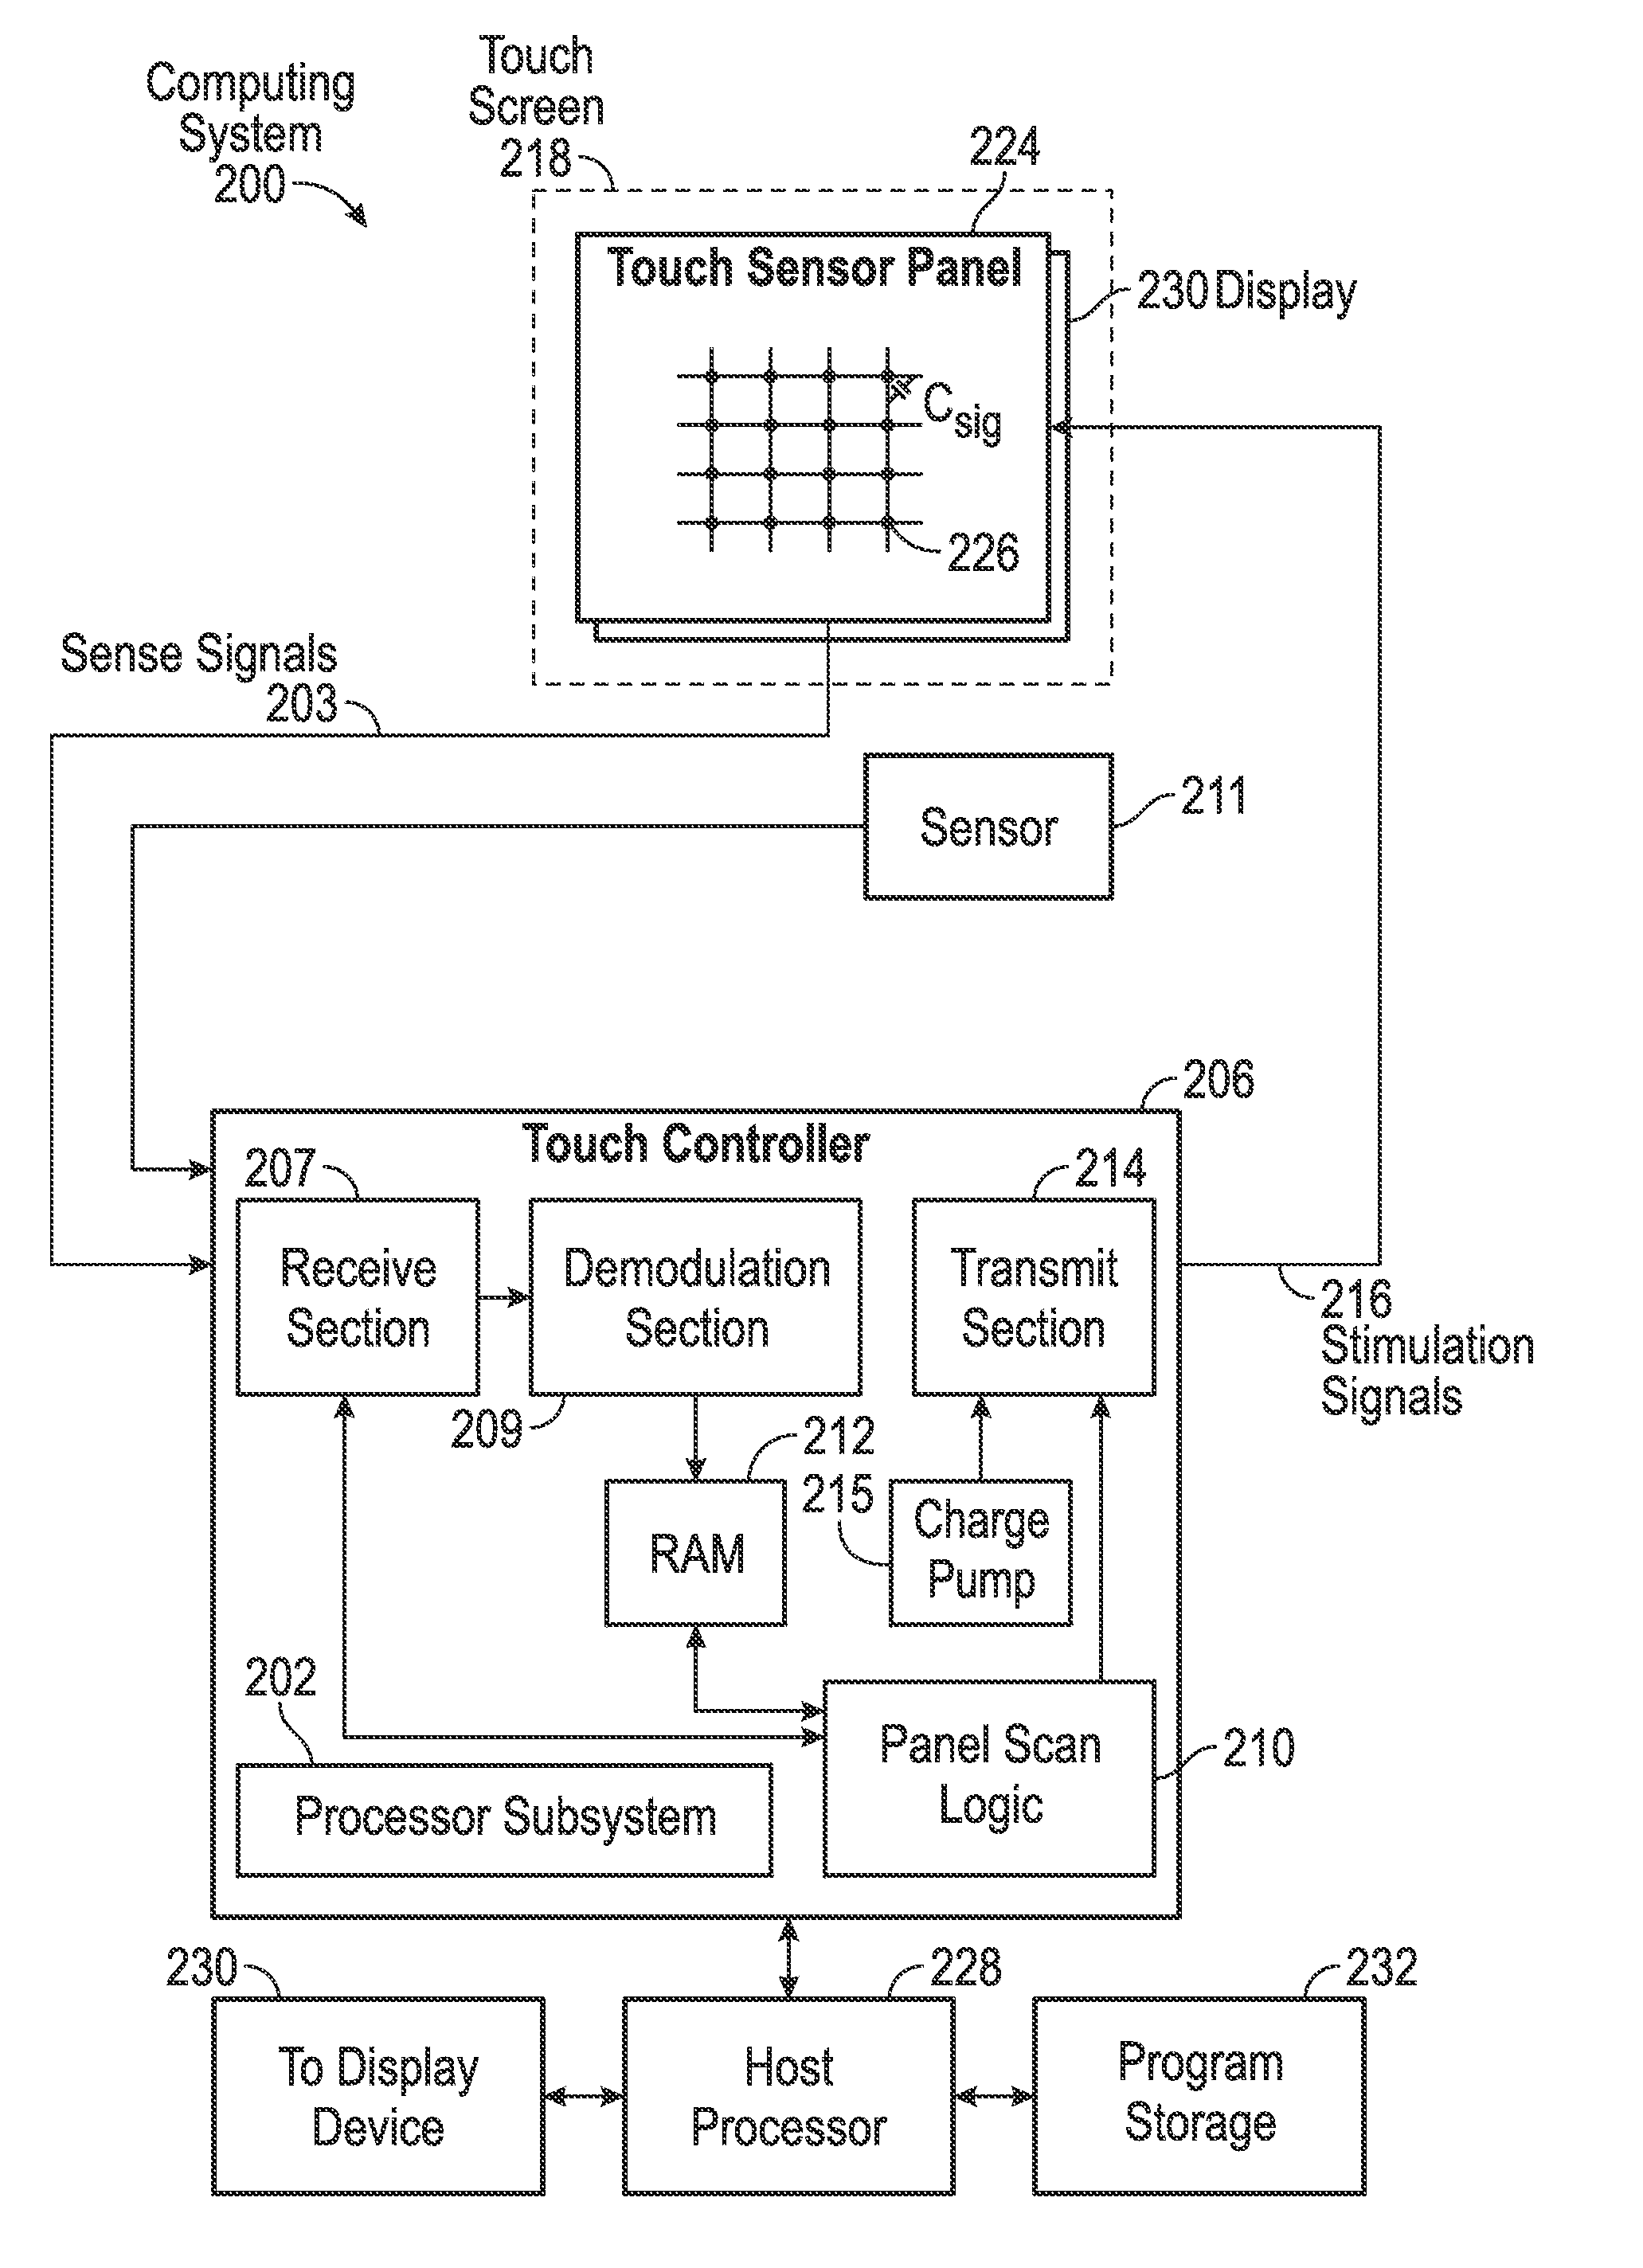 Time multiplexed touch detection and power charging